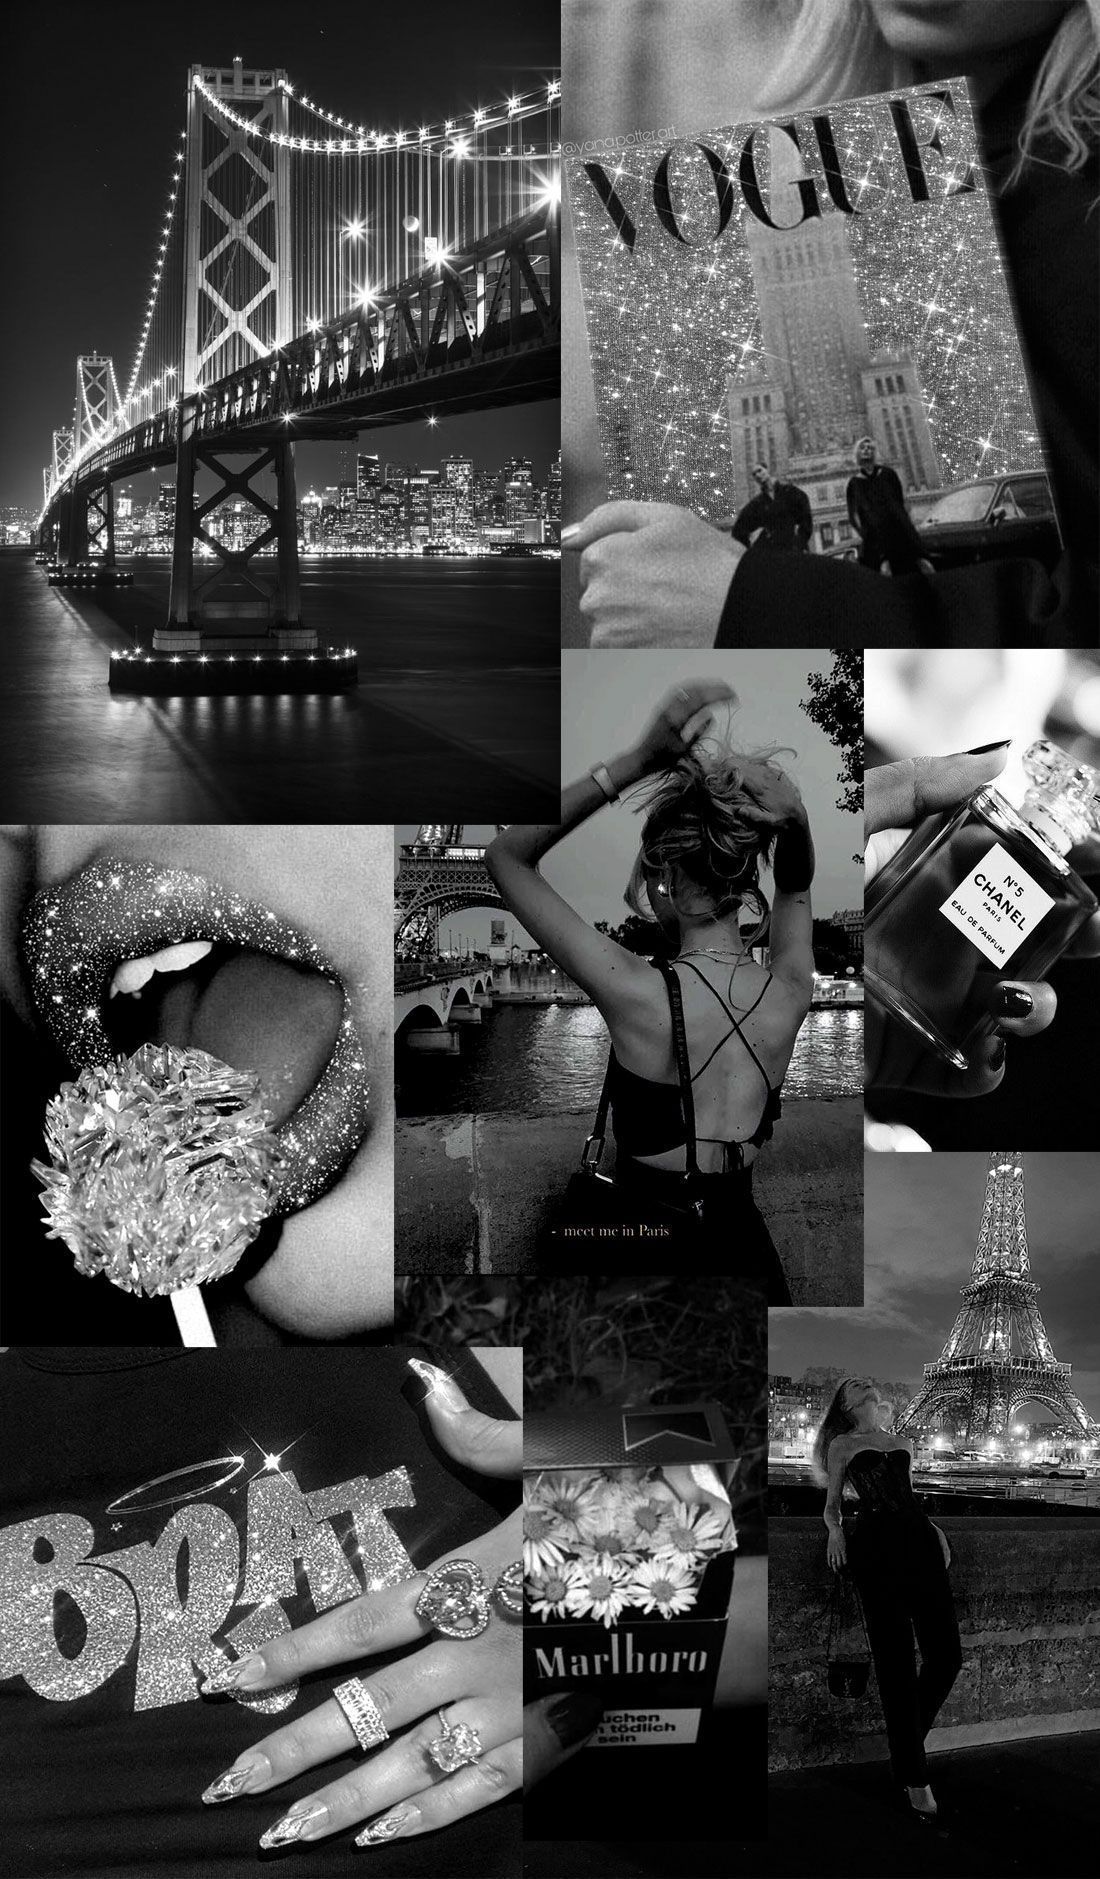 A collage of pictures with different themes - Black, Vogue, collage, bling, Paris, Chanel, gray, black quotes